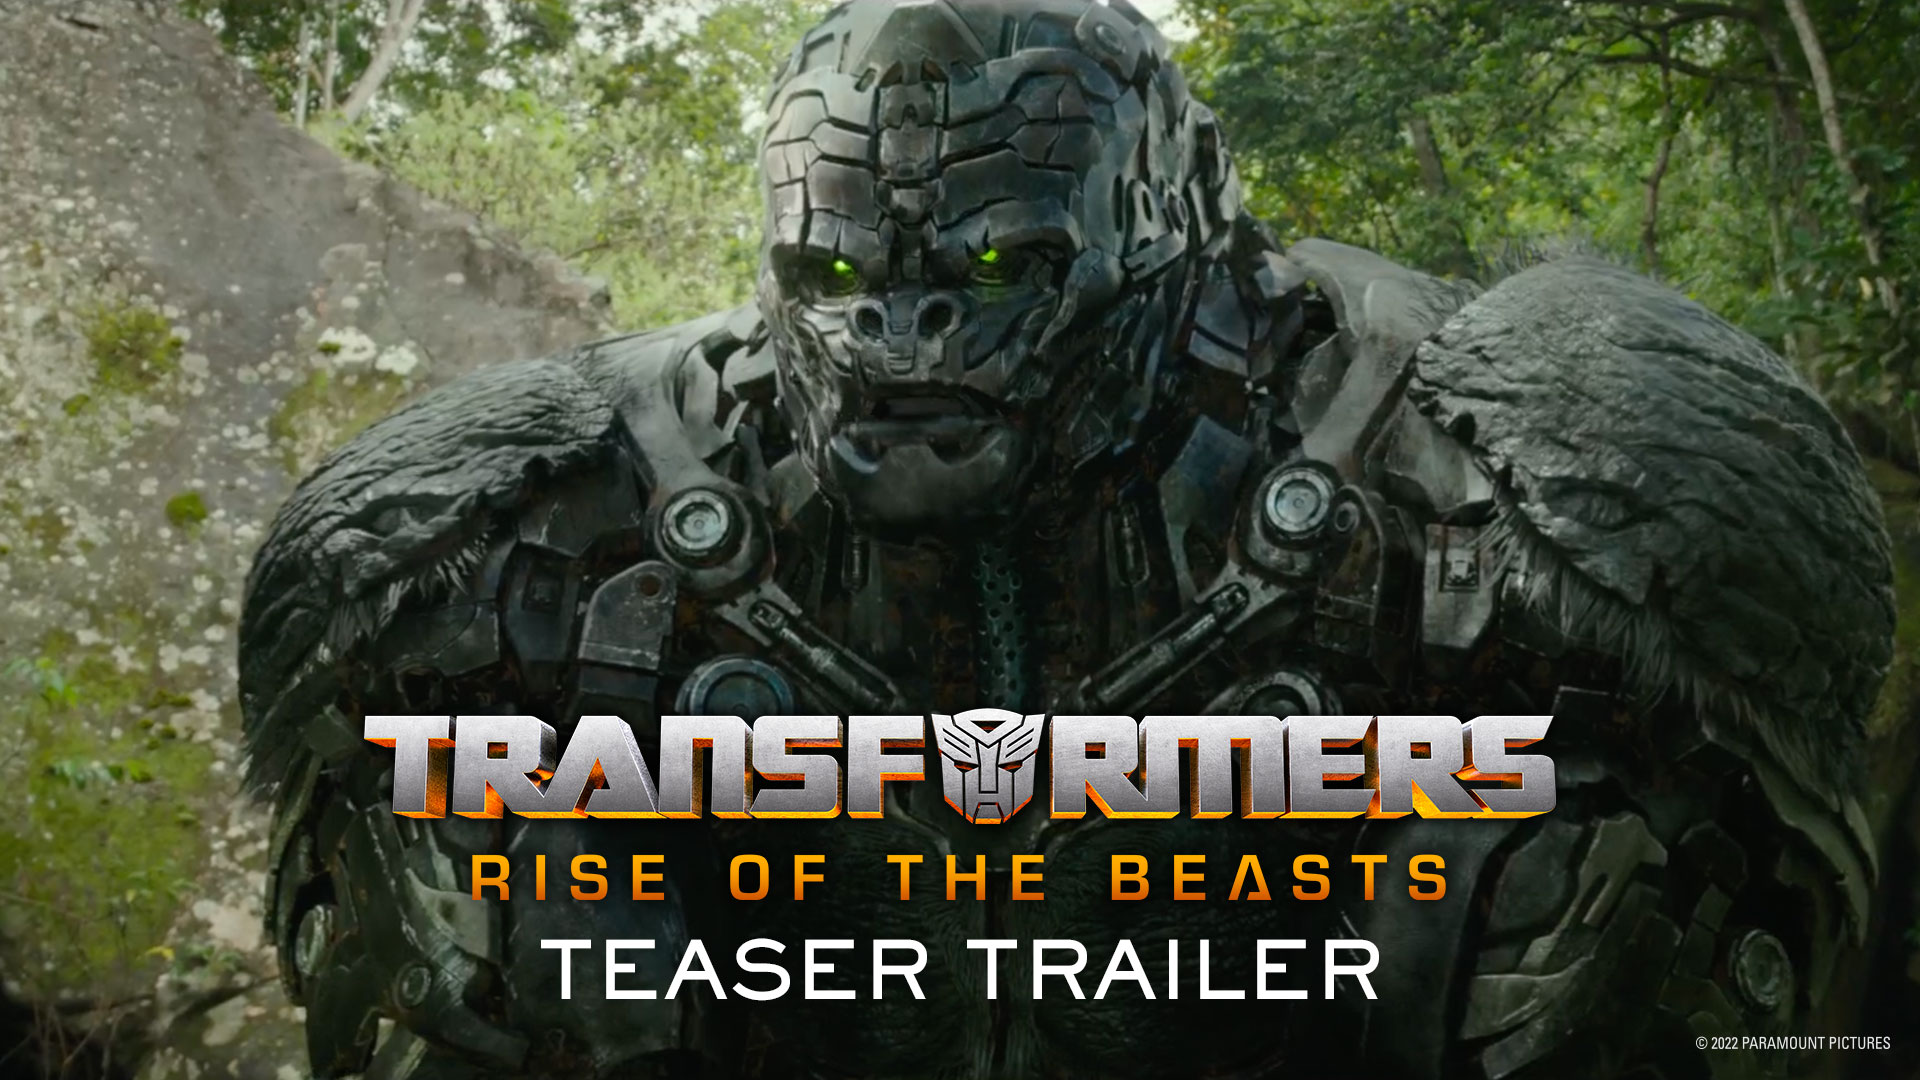 Culture Crave 🍿 on Twitter: "First trailer for ‘Transformers: Rise of